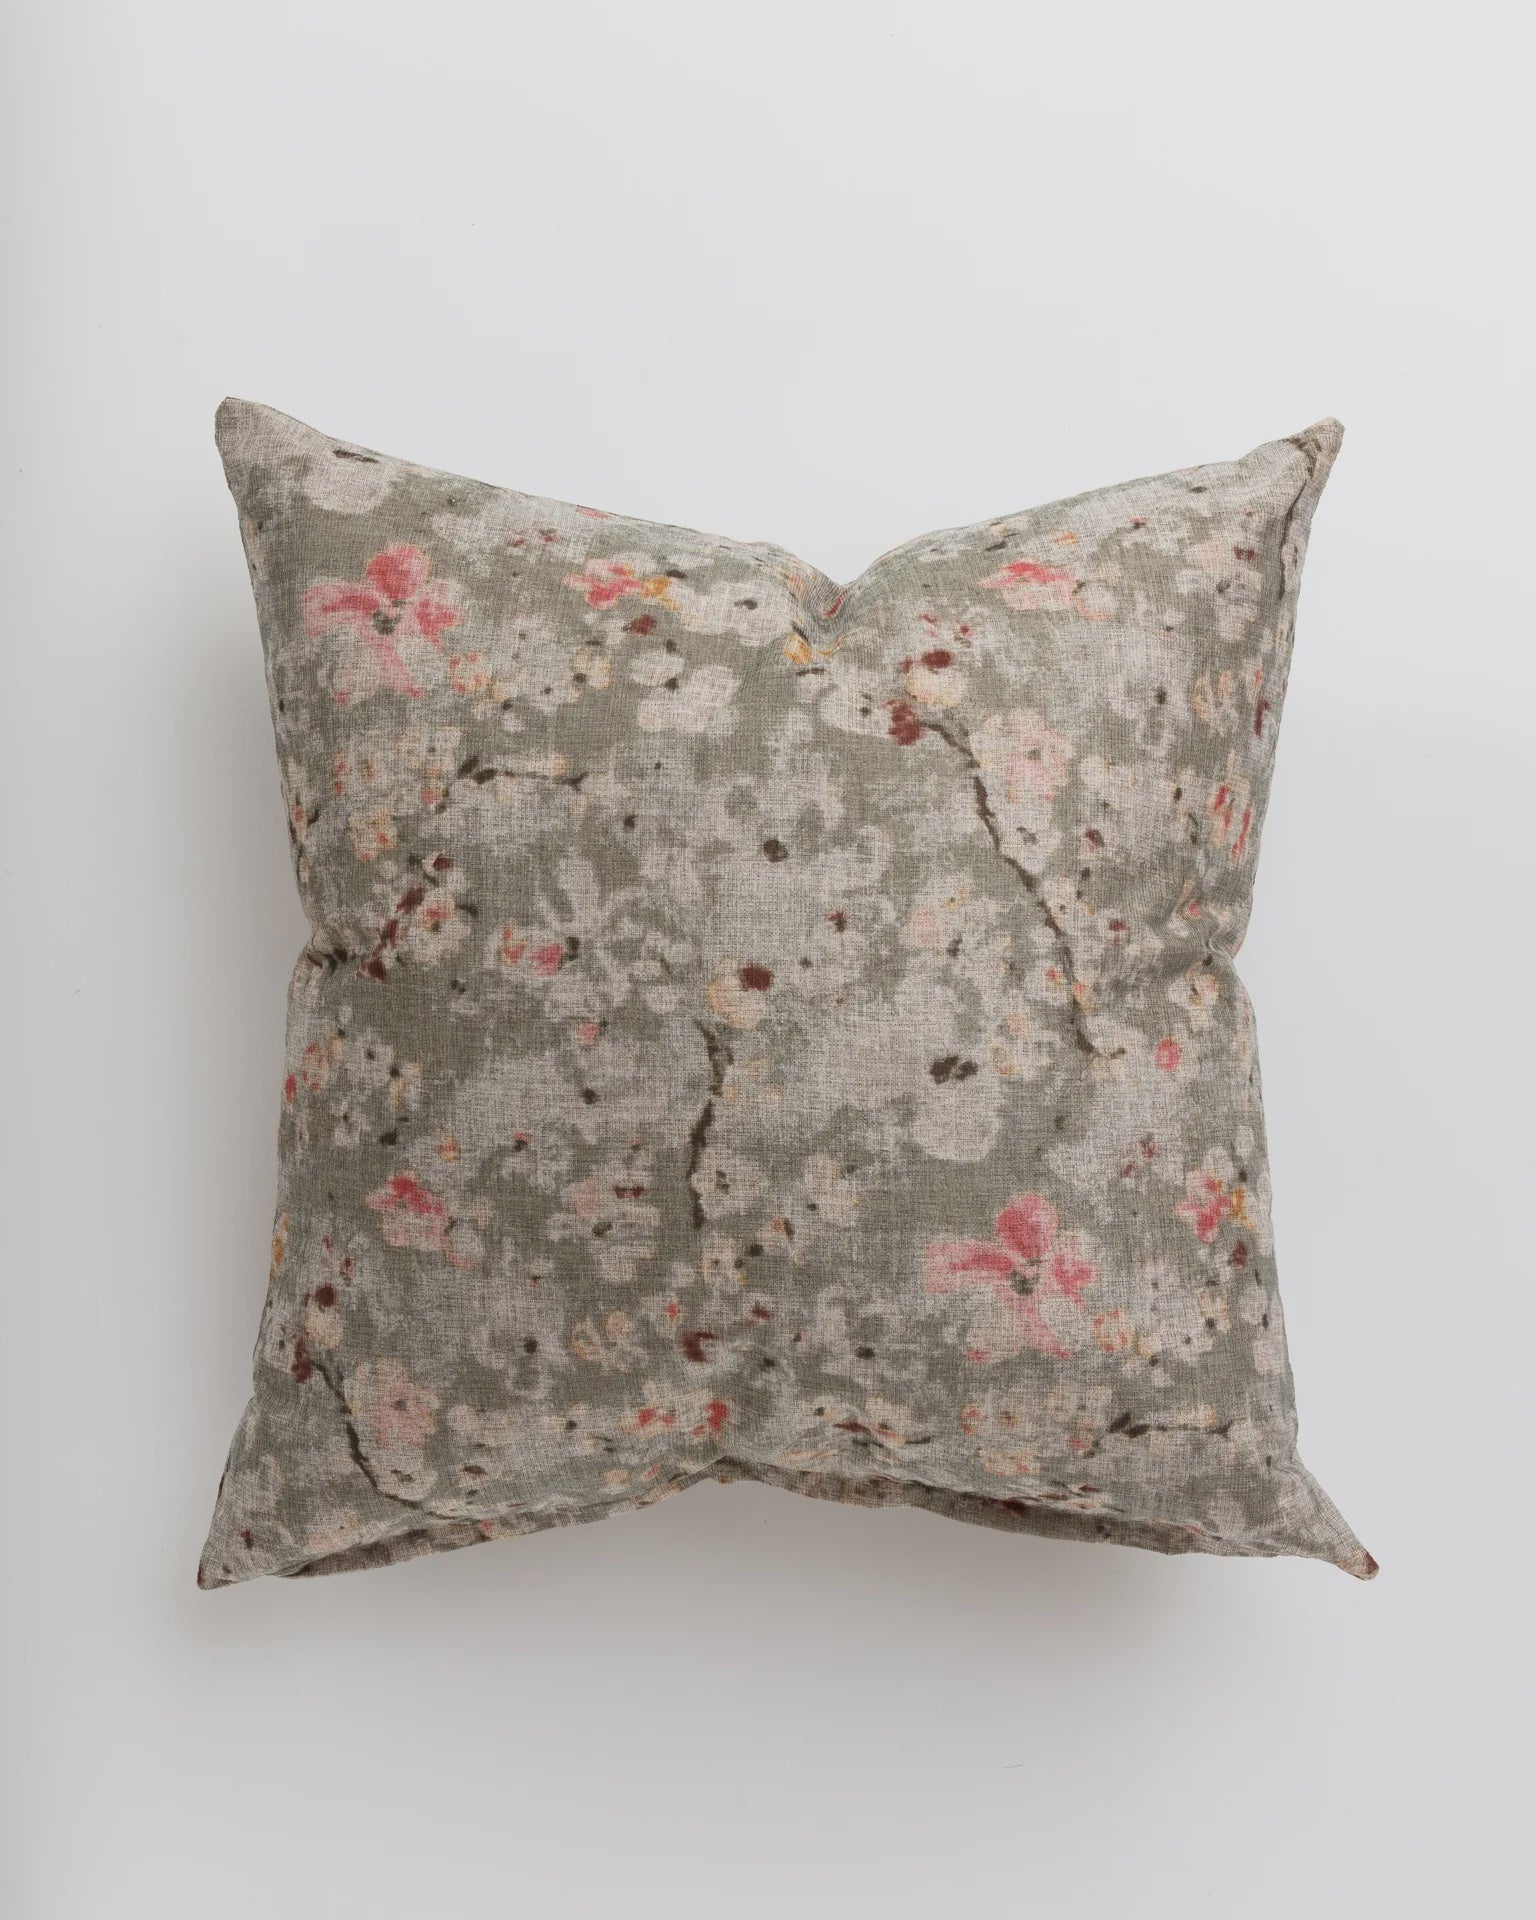 A Gabby Cherry Blossom Taupe Pillow in 26x26 inches with a floral pattern in muted pink and orange hues on a gray background, photographed against a white surface in a Scottsdale, Arizona bungalow.